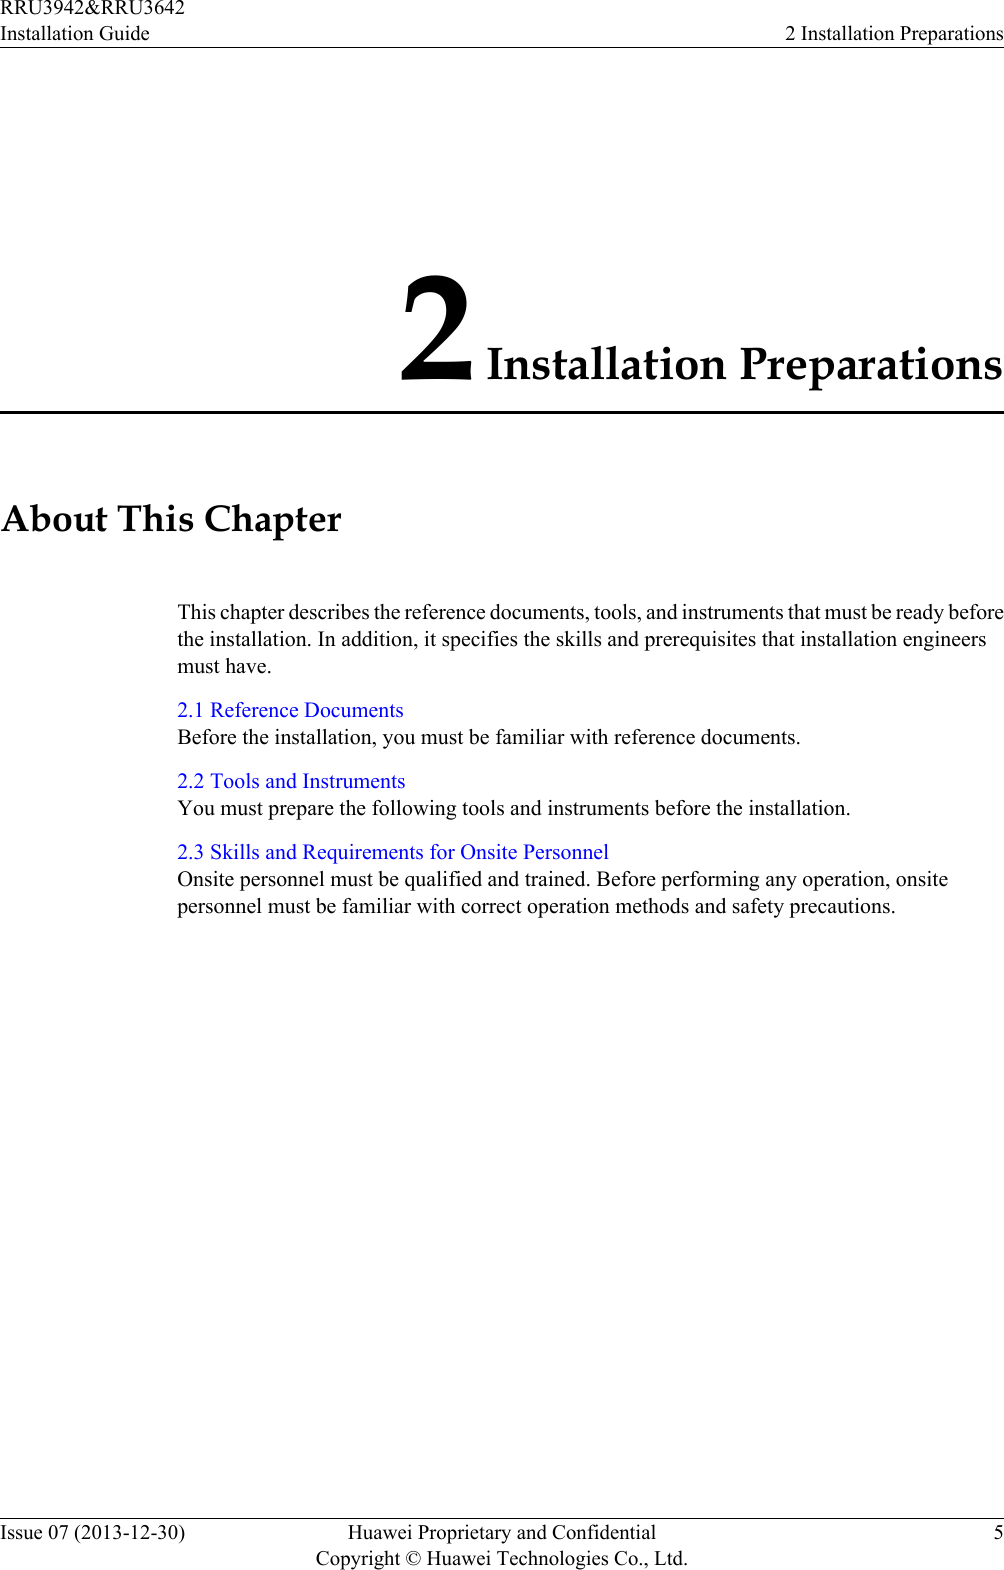 2 Installation PreparationsAbout This ChapterThis chapter describes the reference documents, tools, and instruments that must be ready beforethe installation. In addition, it specifies the skills and prerequisites that installation engineersmust have.2.1 Reference DocumentsBefore the installation, you must be familiar with reference documents.2.2 Tools and InstrumentsYou must prepare the following tools and instruments before the installation.2.3 Skills and Requirements for Onsite PersonnelOnsite personnel must be qualified and trained. Before performing any operation, onsitepersonnel must be familiar with correct operation methods and safety precautions.RRU3942&amp;RRU3642Installation Guide 2 Installation PreparationsIssue 07 (2013-12-30) Huawei Proprietary and ConfidentialCopyright © Huawei Technologies Co., Ltd.5